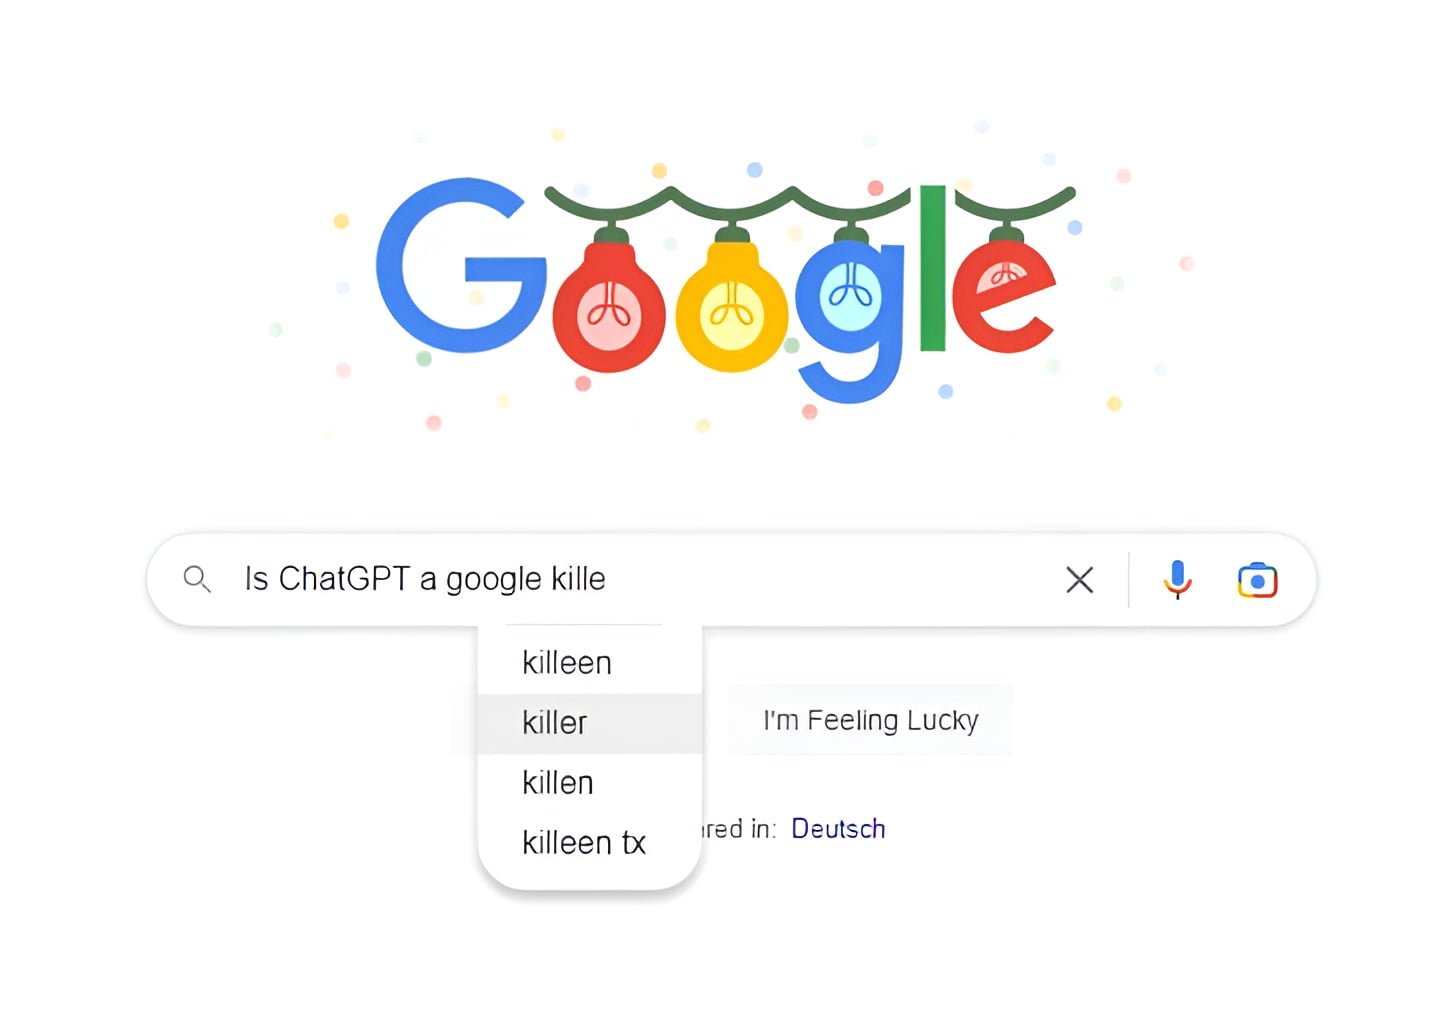 Google search does not suffer from ChatGPT or the new Bing yet